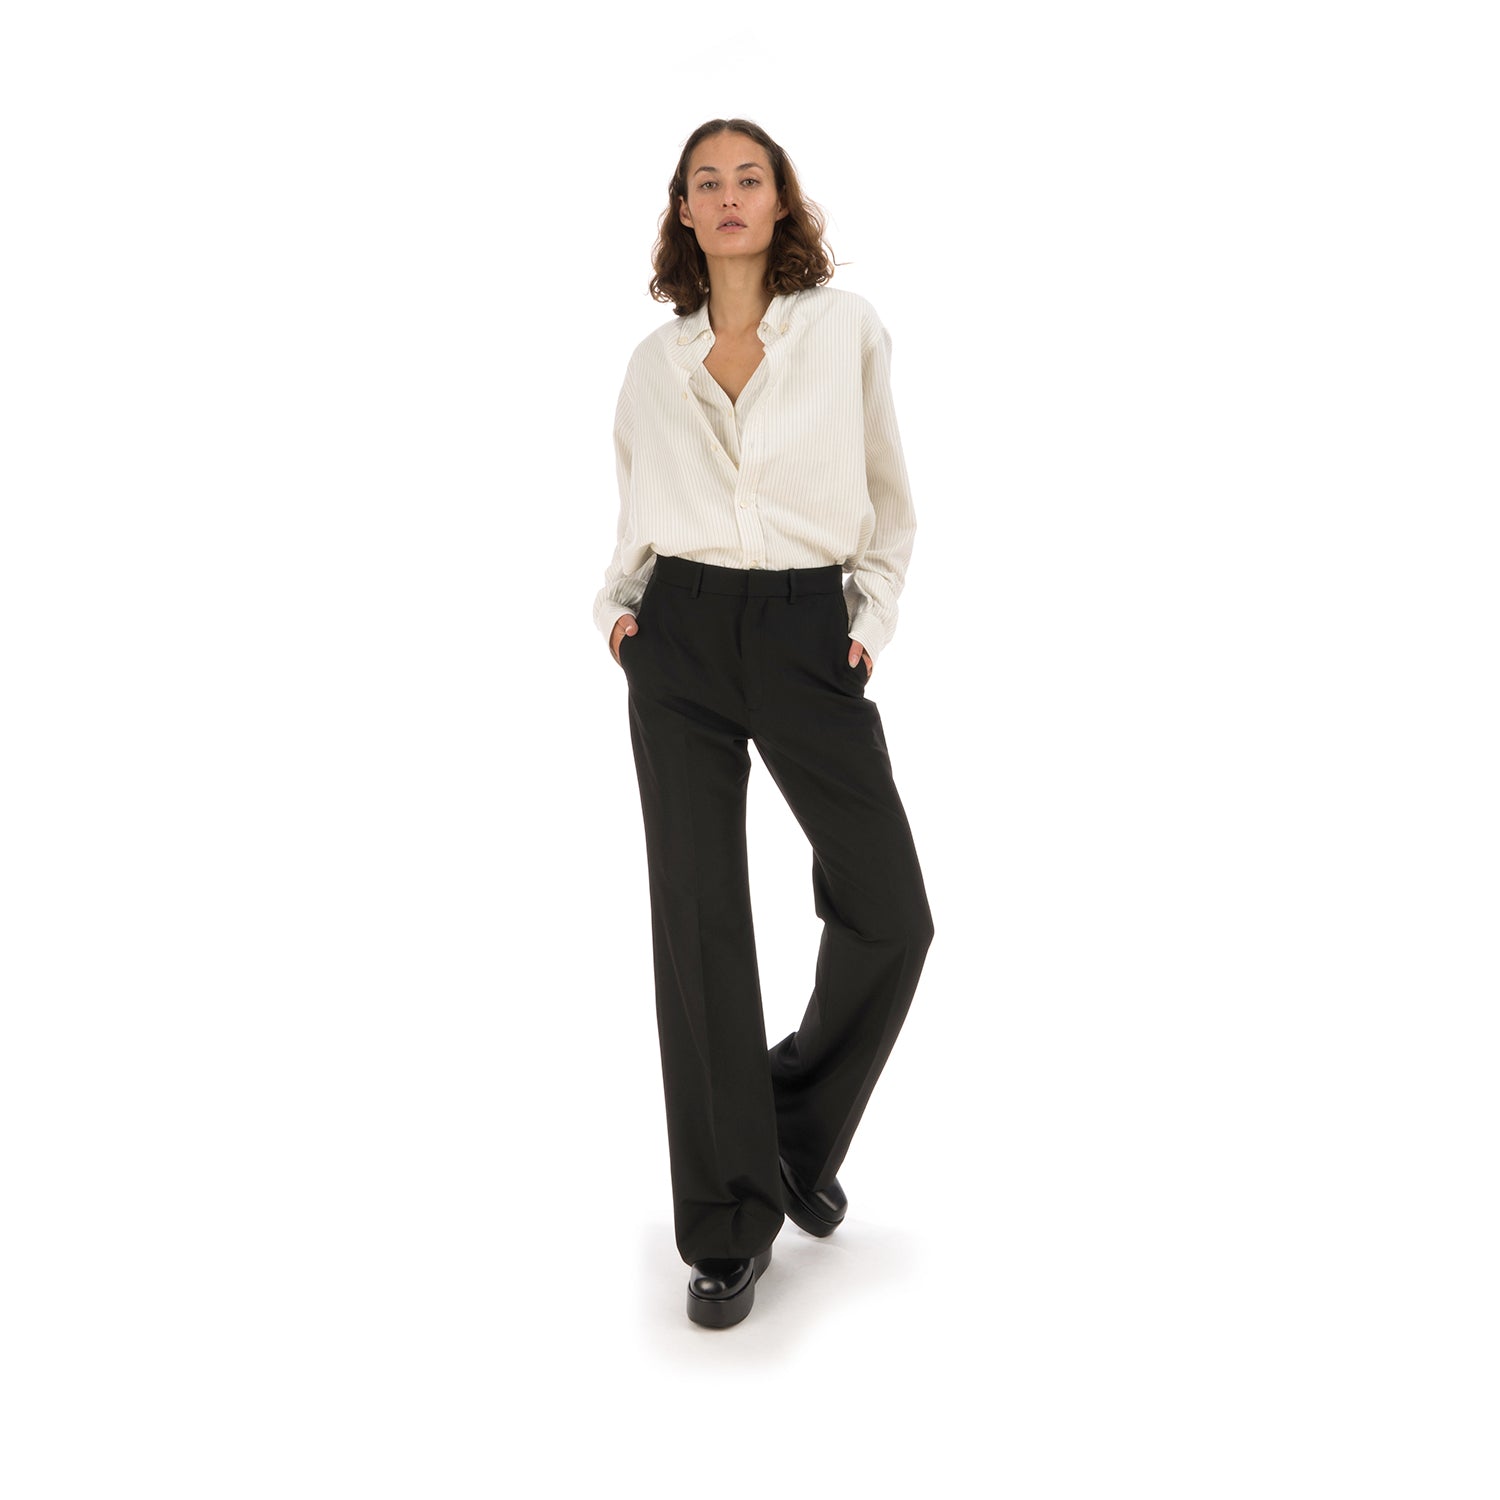 Buy Reiss Hope Modern Fit Travel Suit: Trousers from Next USA